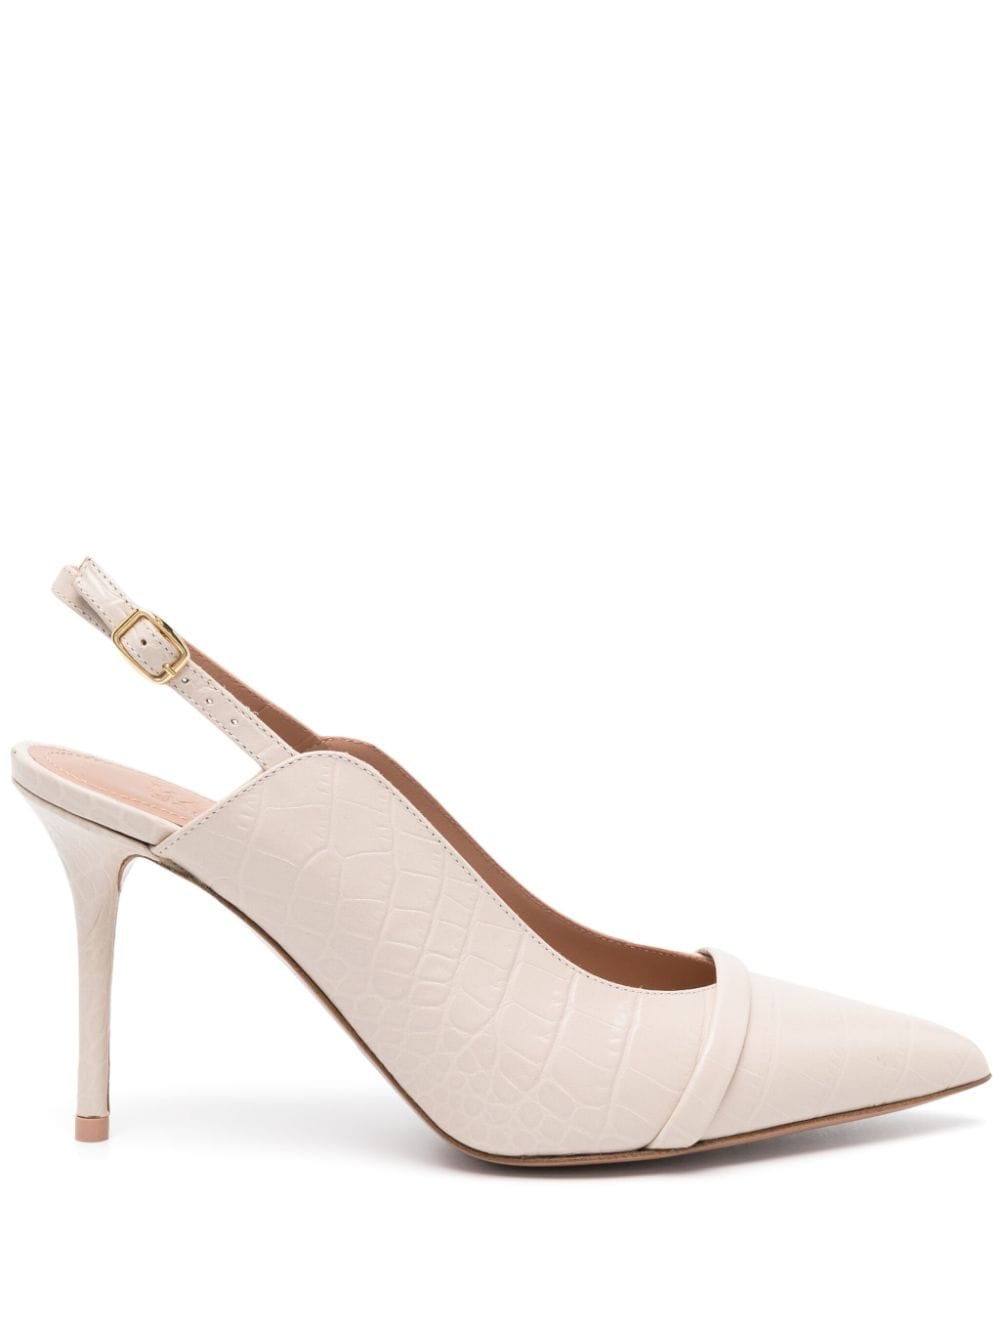 Malone Souliers Marion Pumps 85mm - Nude von Malone Souliers